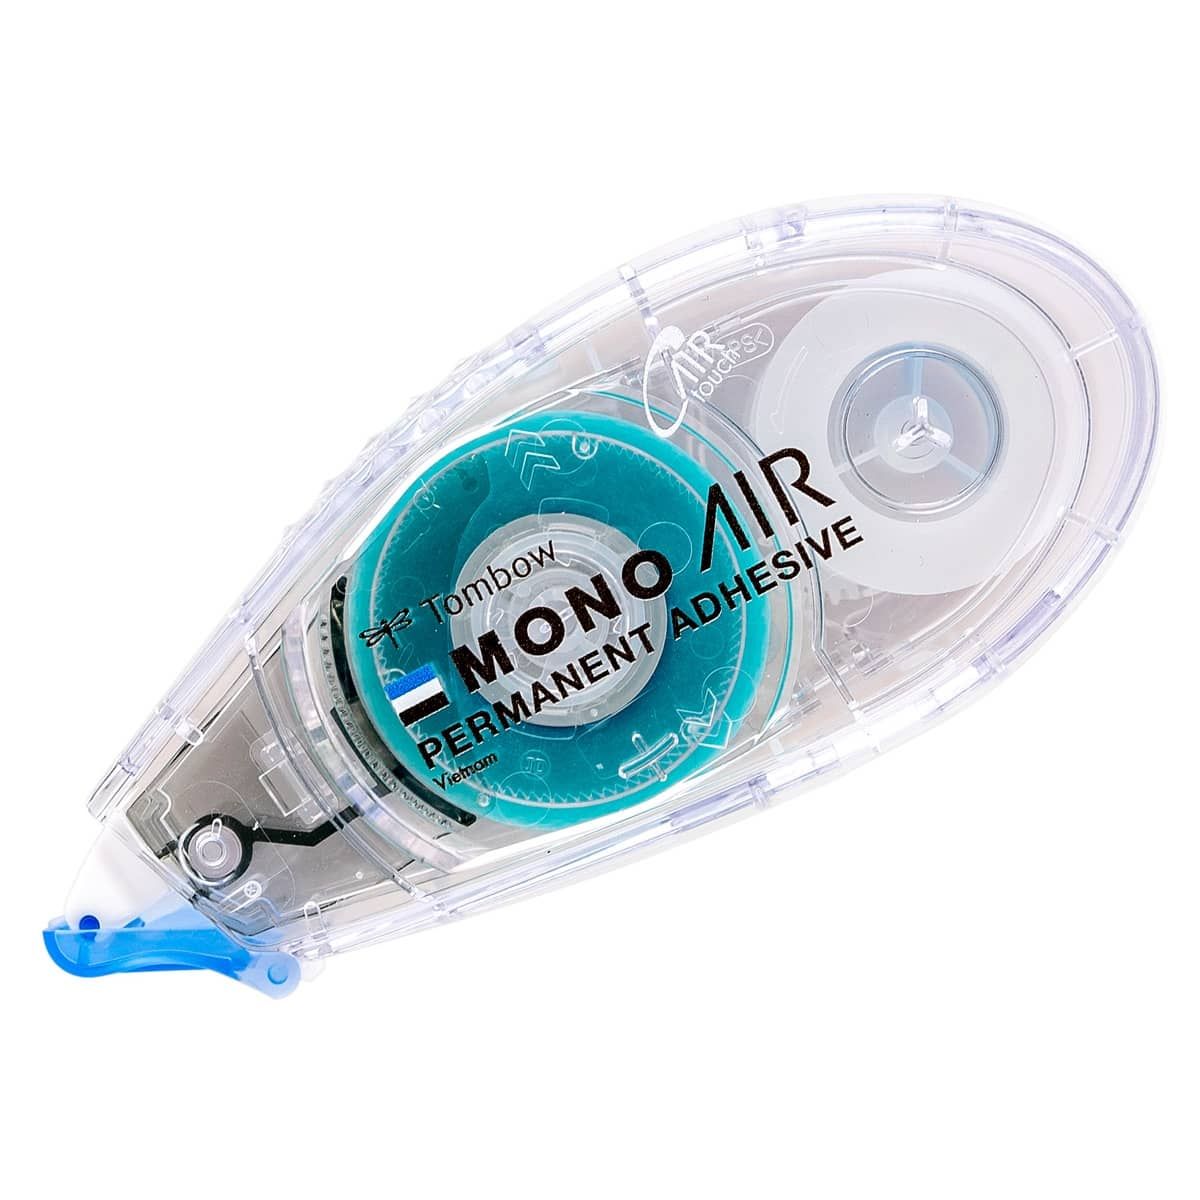 Tombow MONO Air Touch Adhesive Dispenser